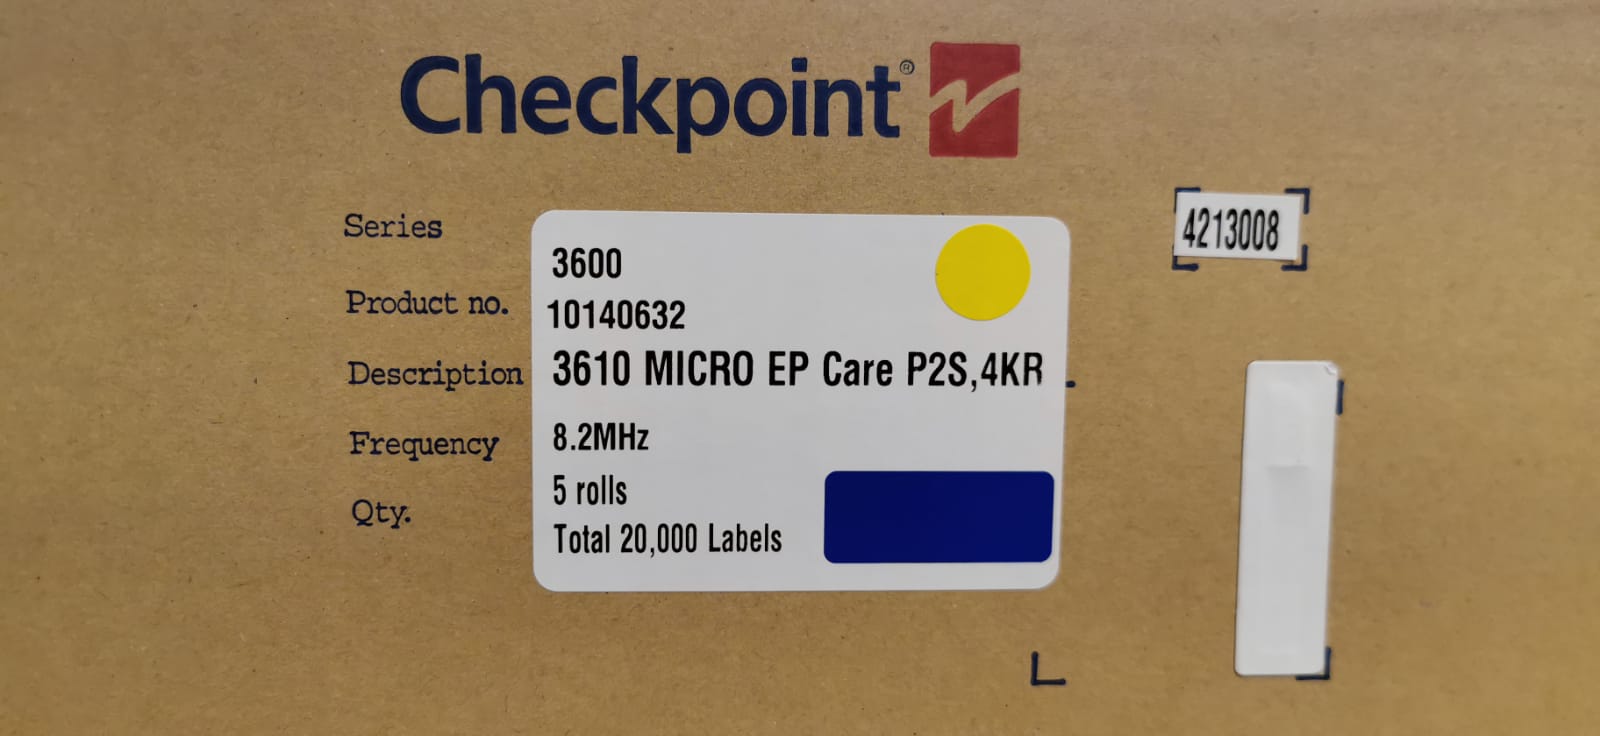 Checkpoint  RFID Tags